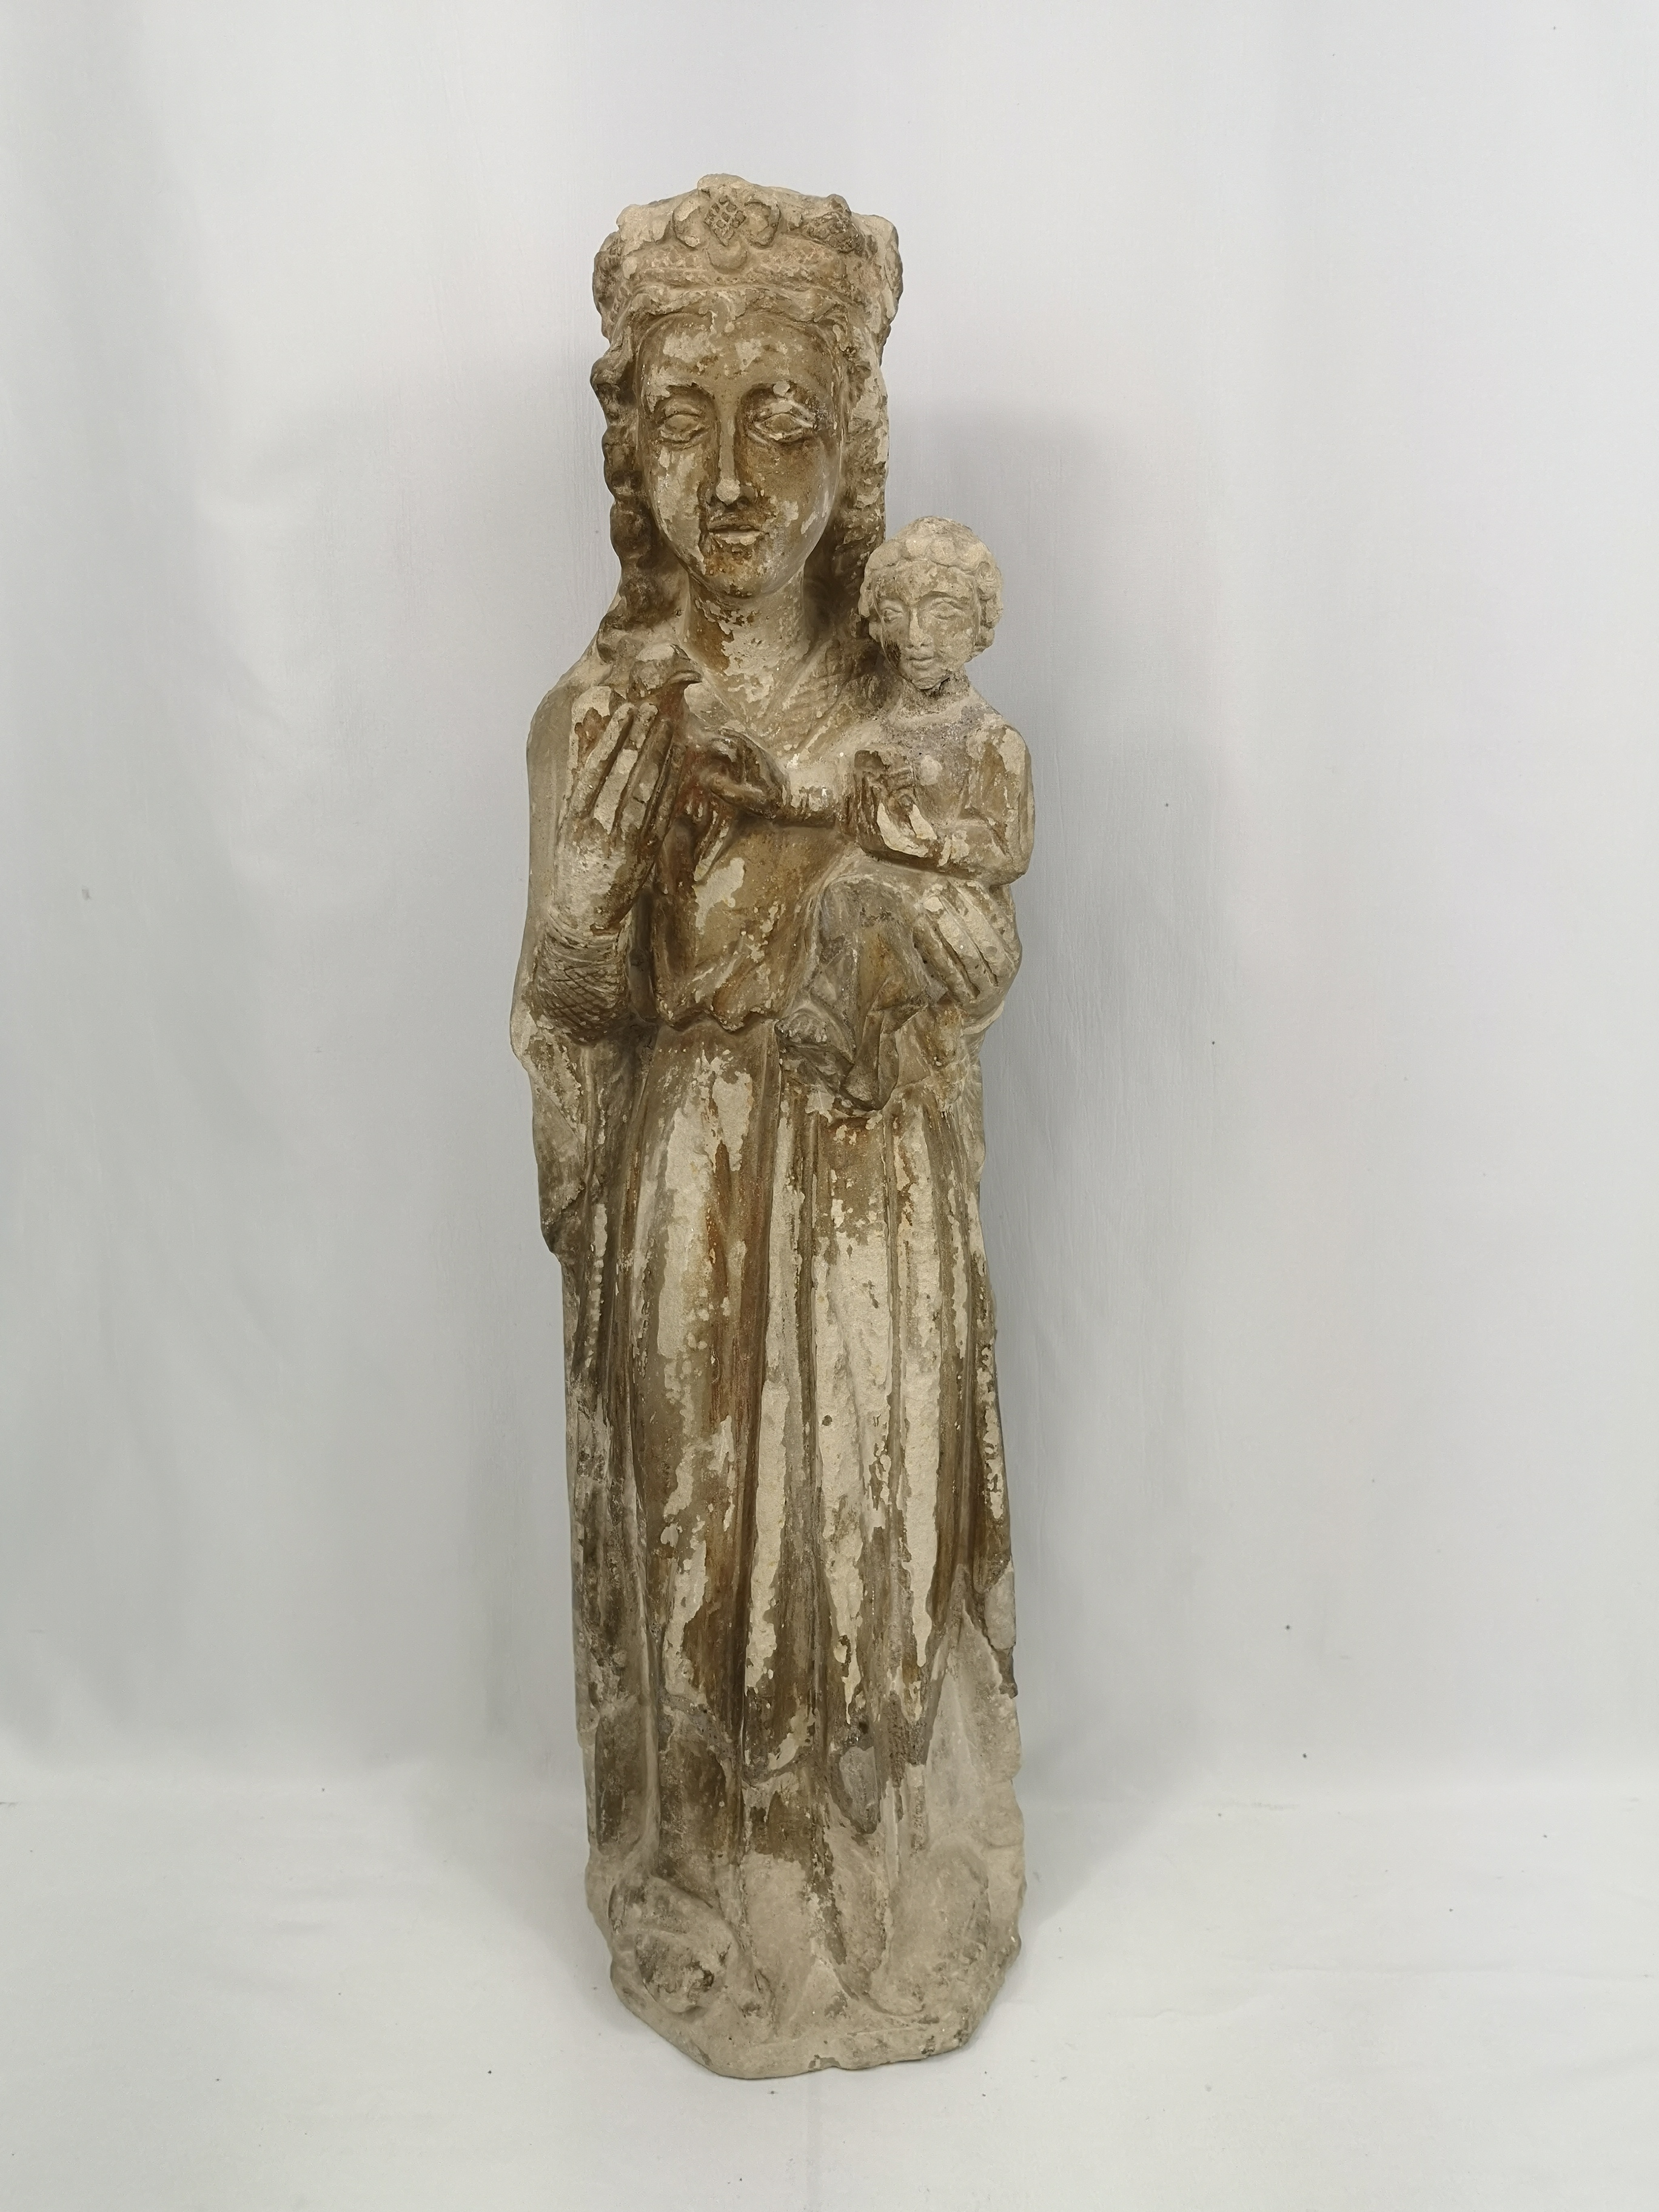 12th century sandstone carving of the Madonna and child